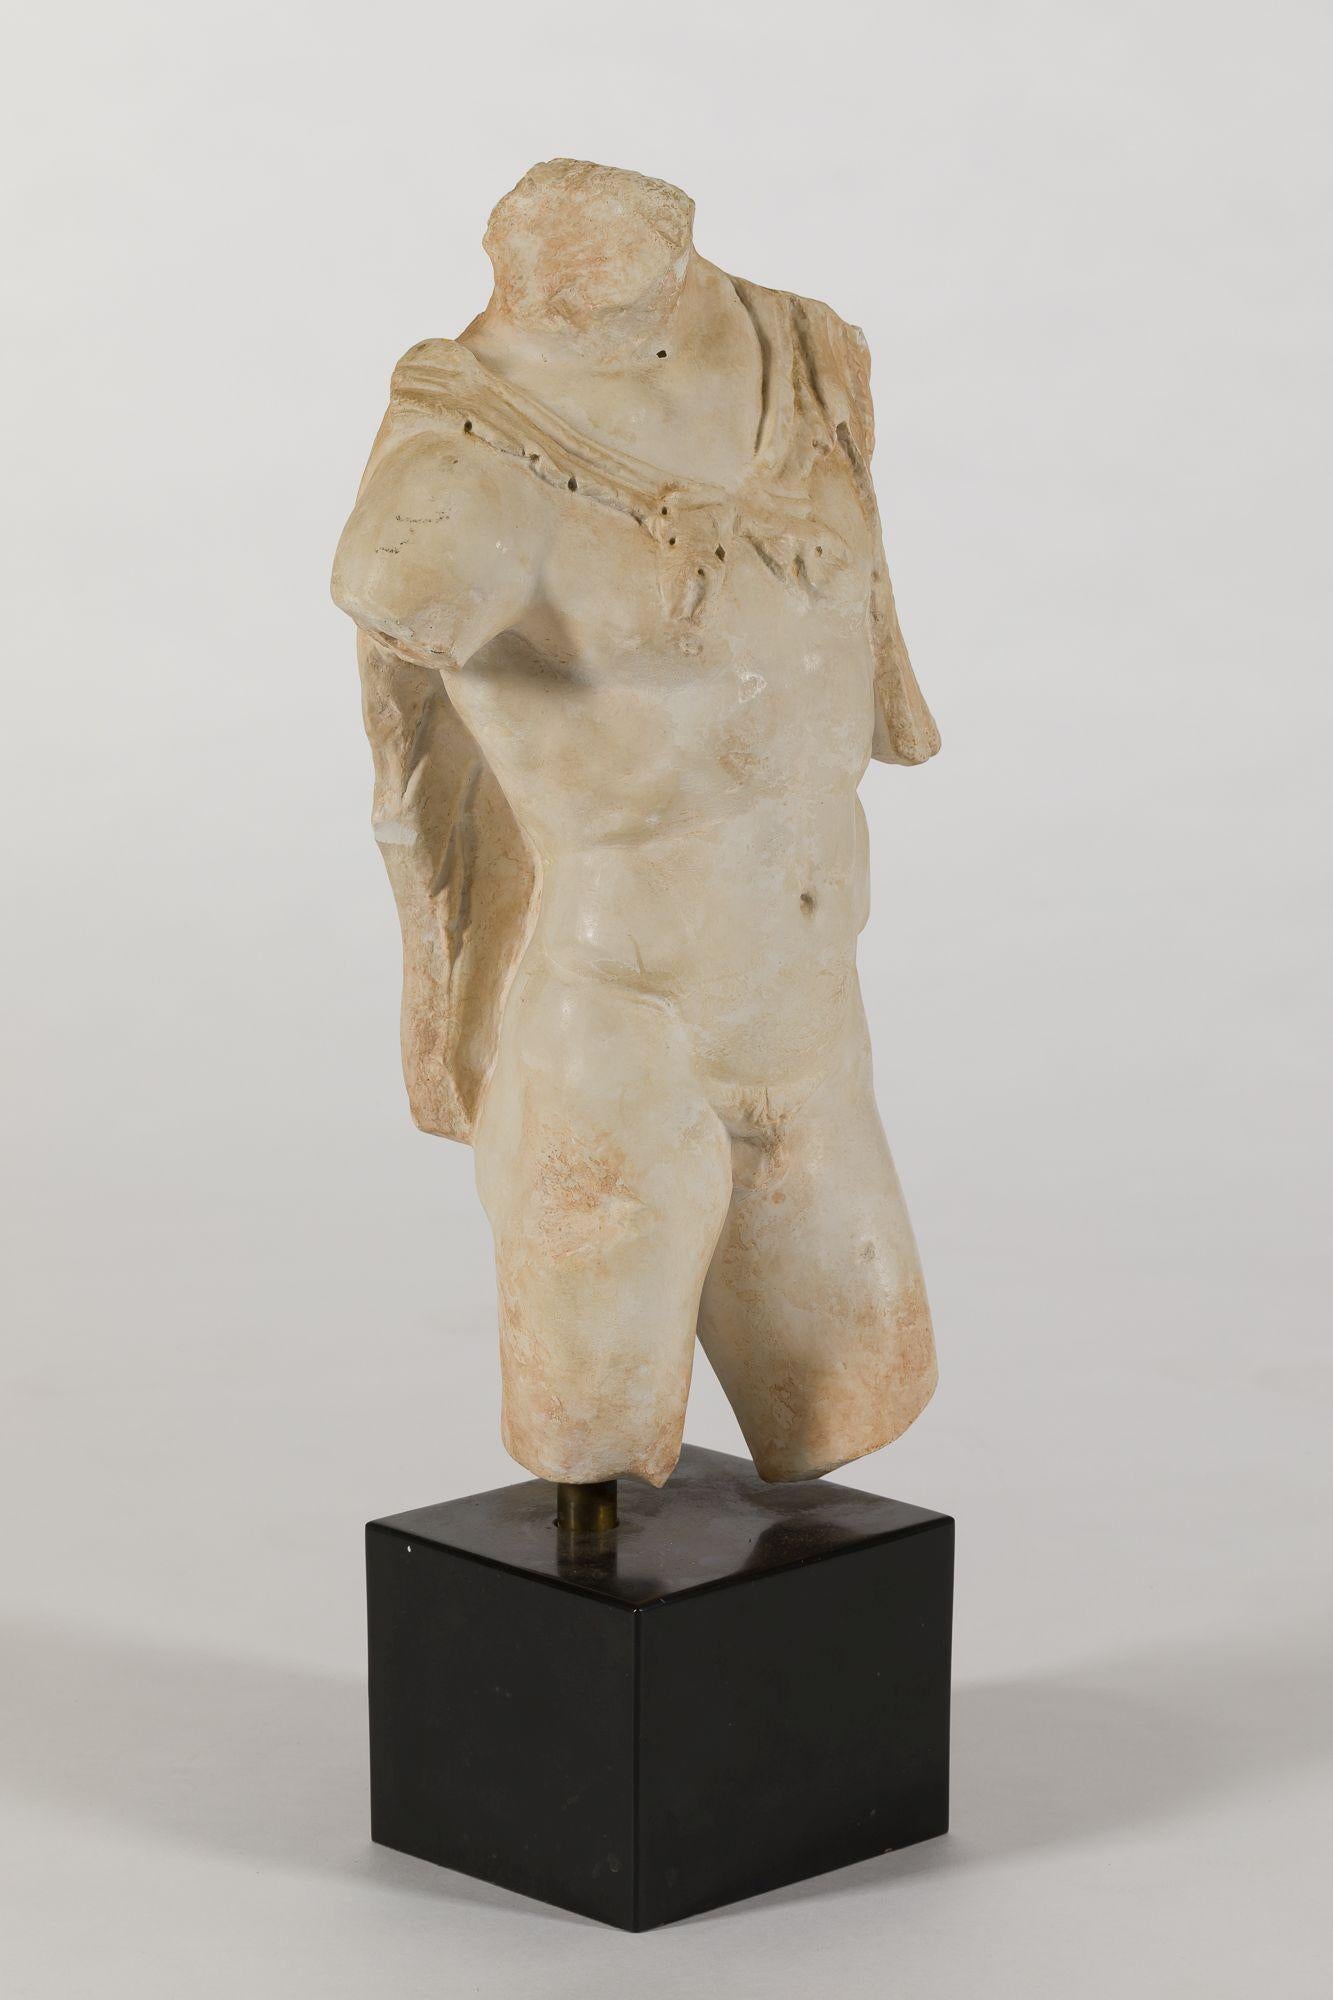 20th century cast reproduction of classical sculpture, created as decorative object.